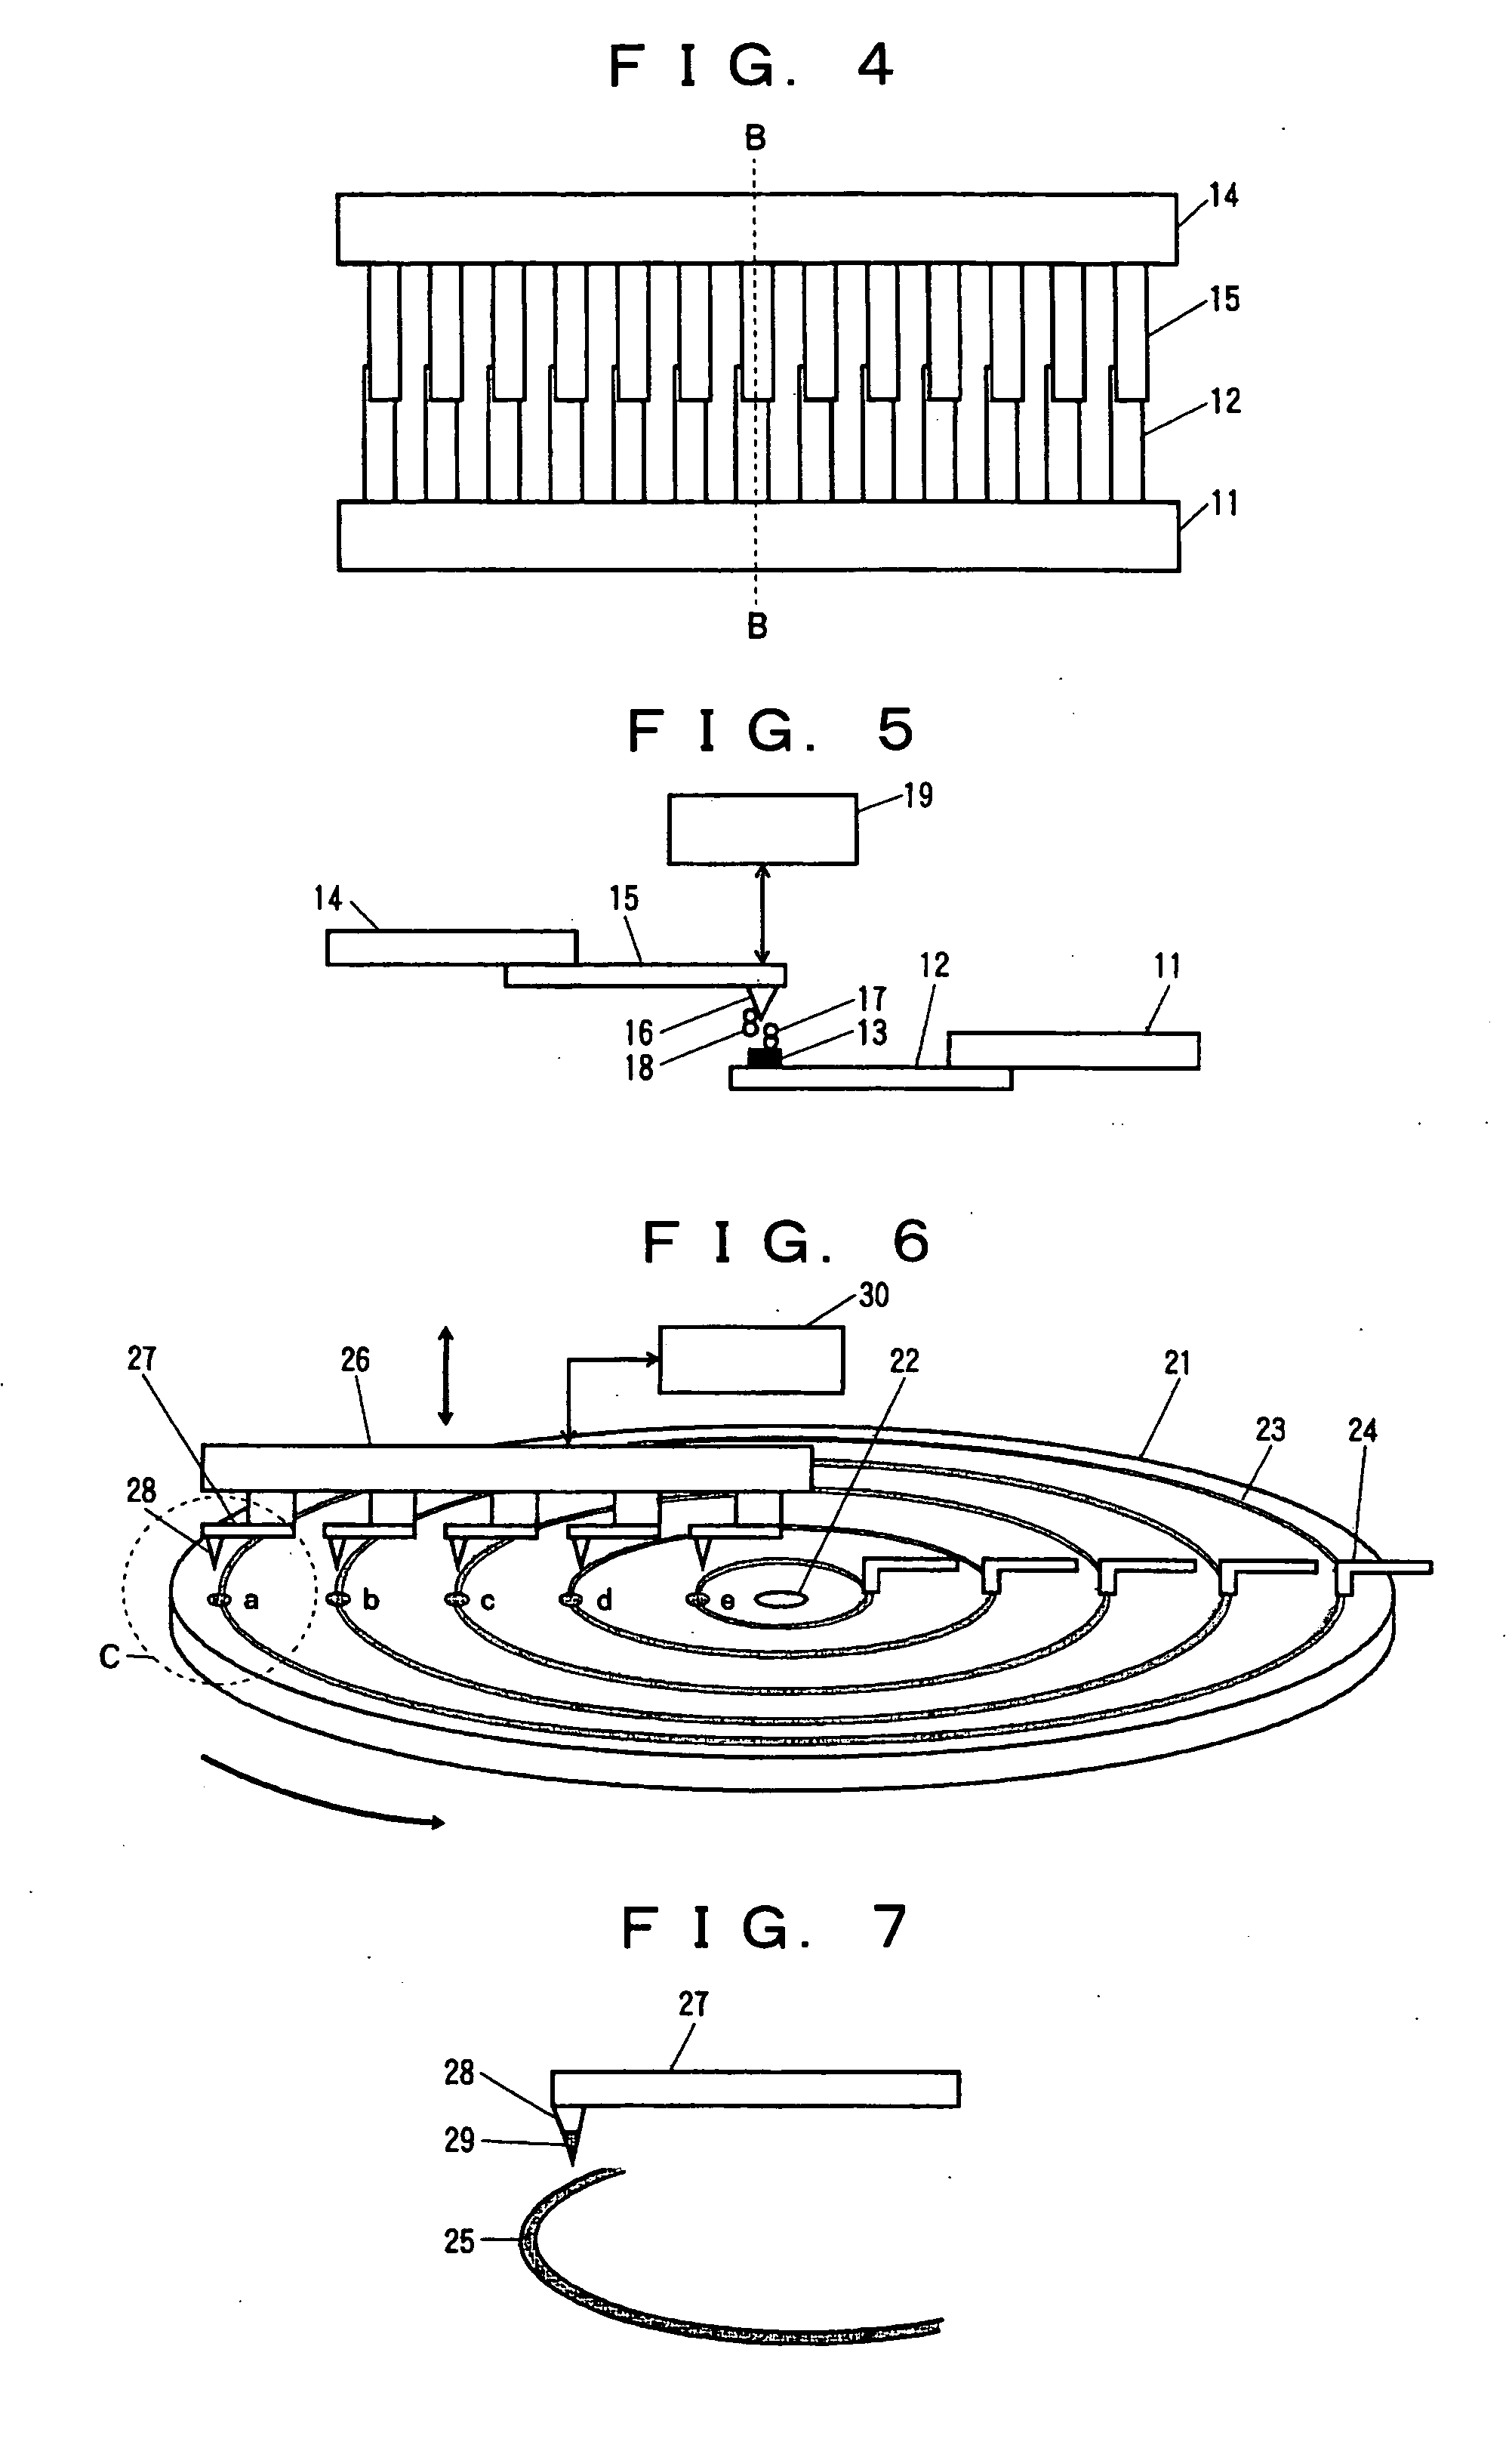 Nanogap series substance capturing, detecting and identifying method and device